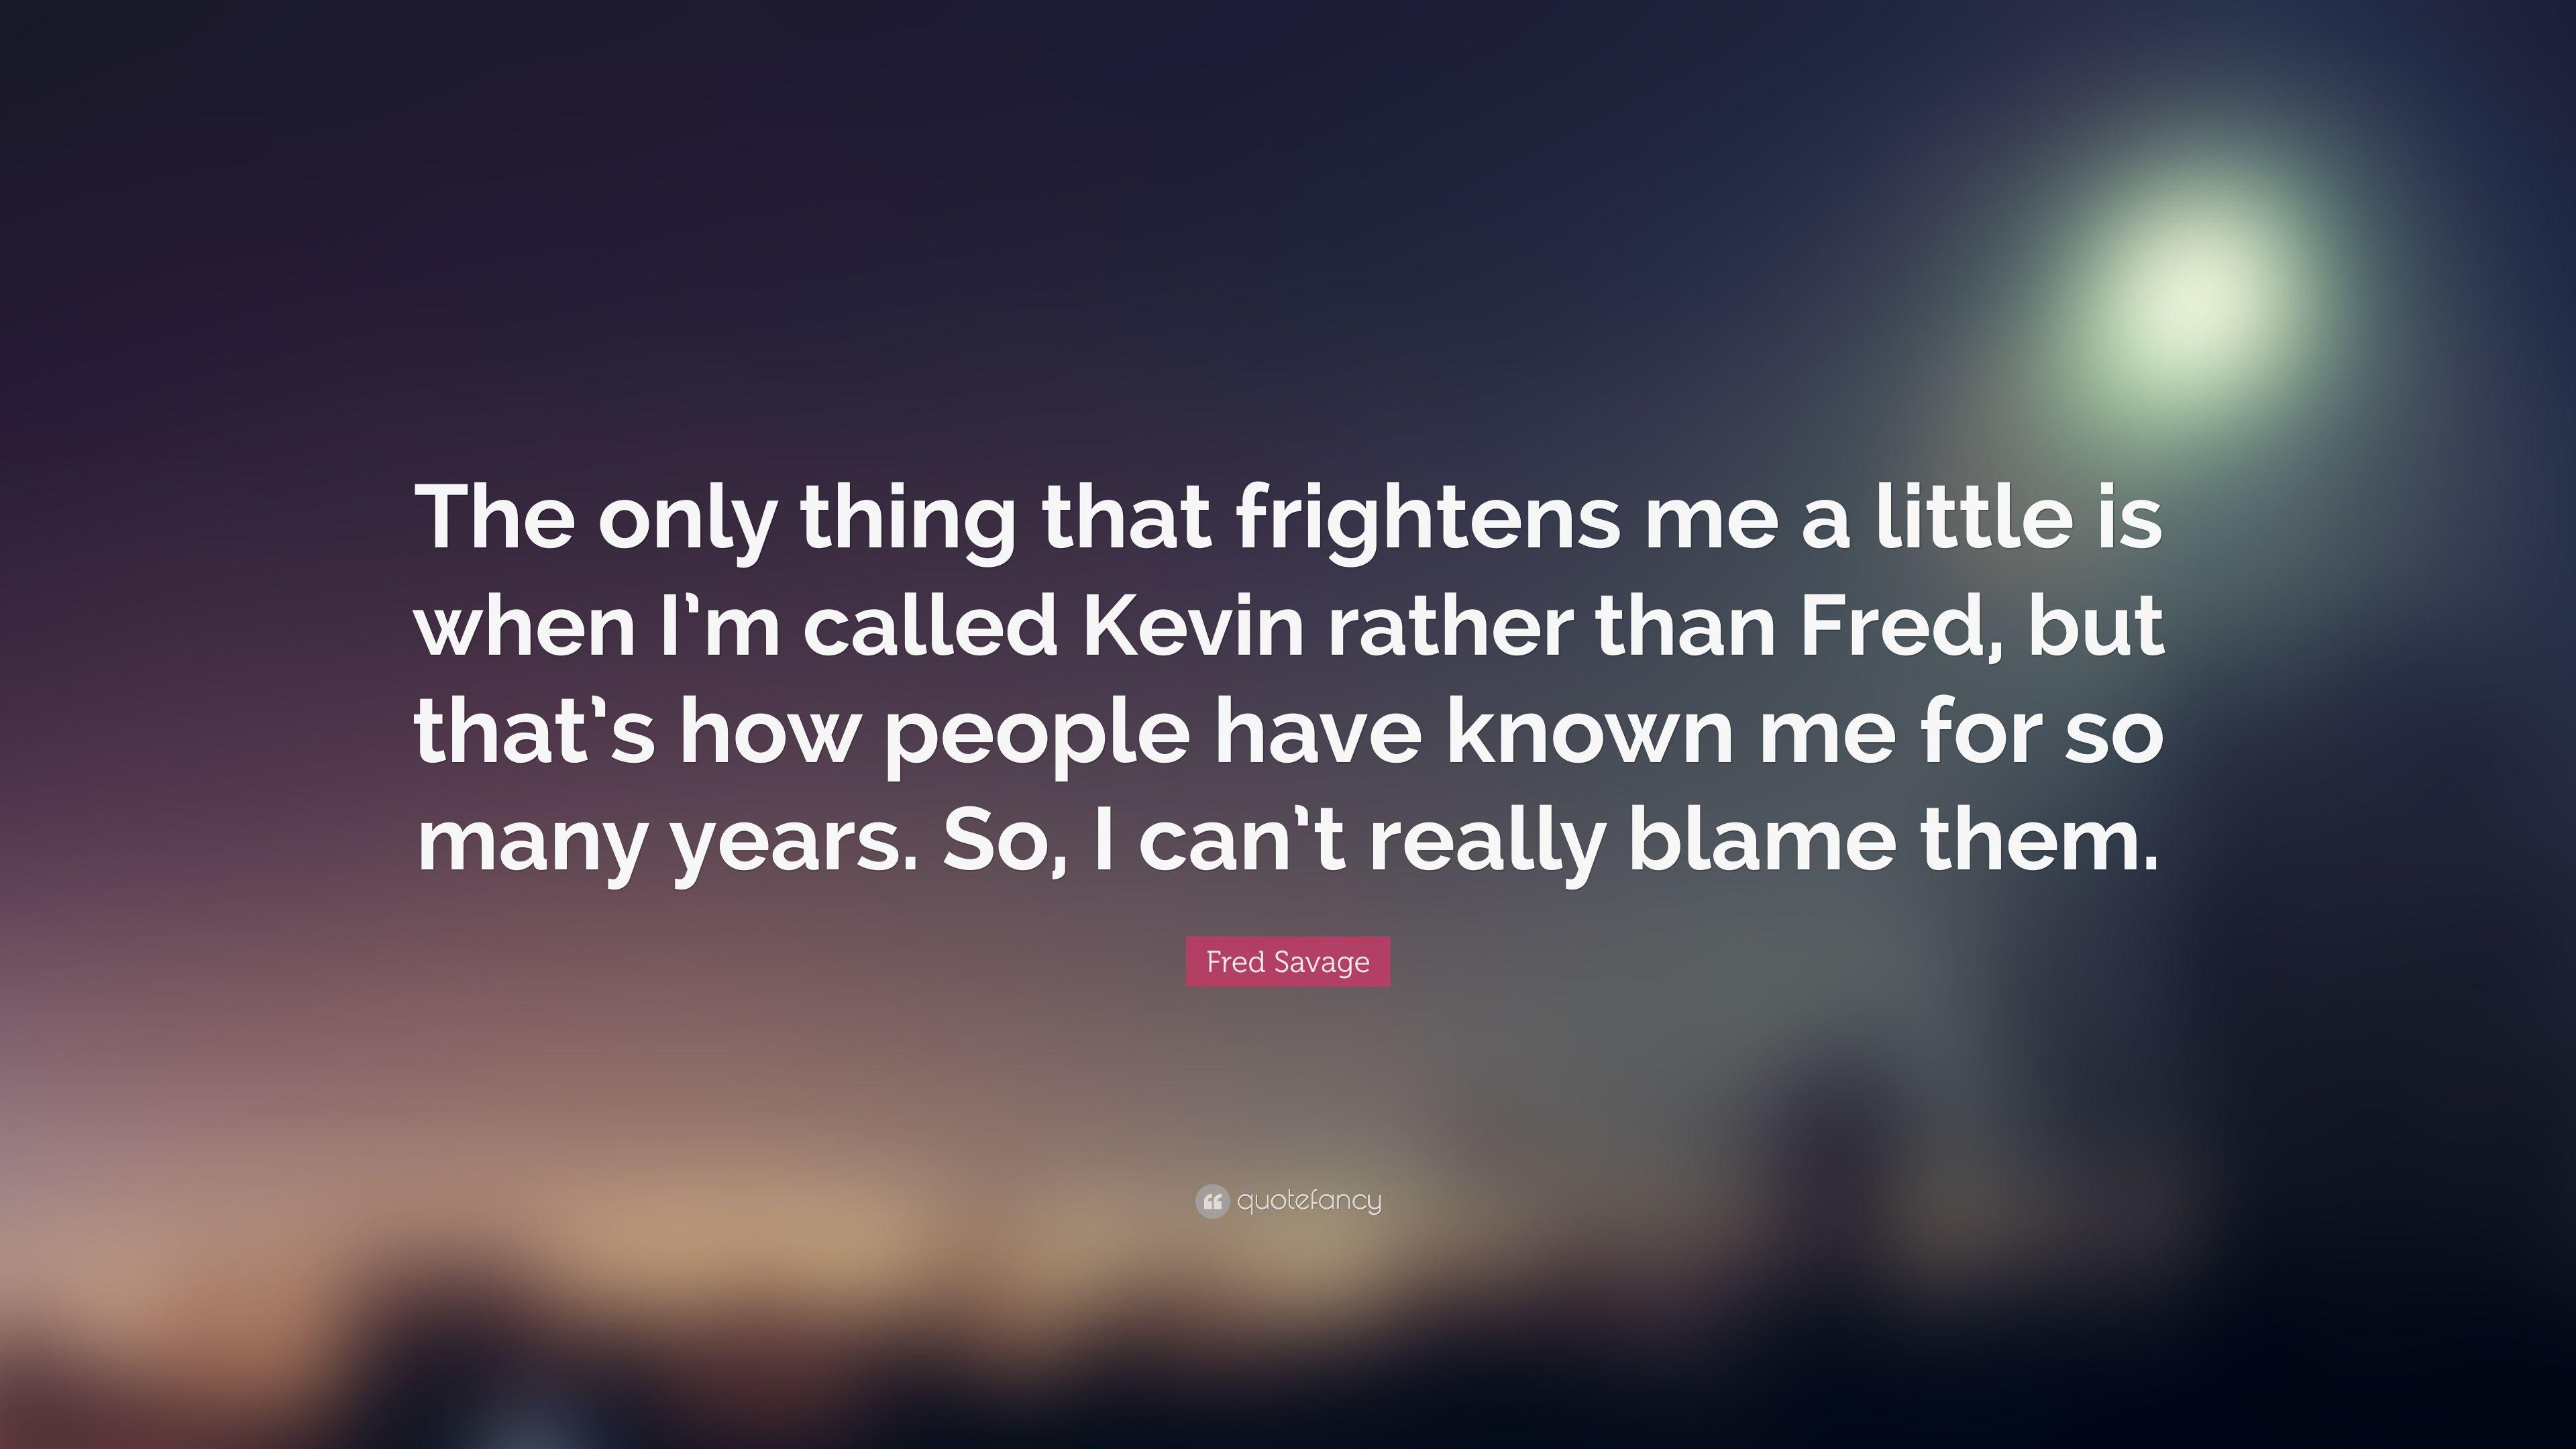 Fred Savage Quote: “The only thing that frightens me a little is